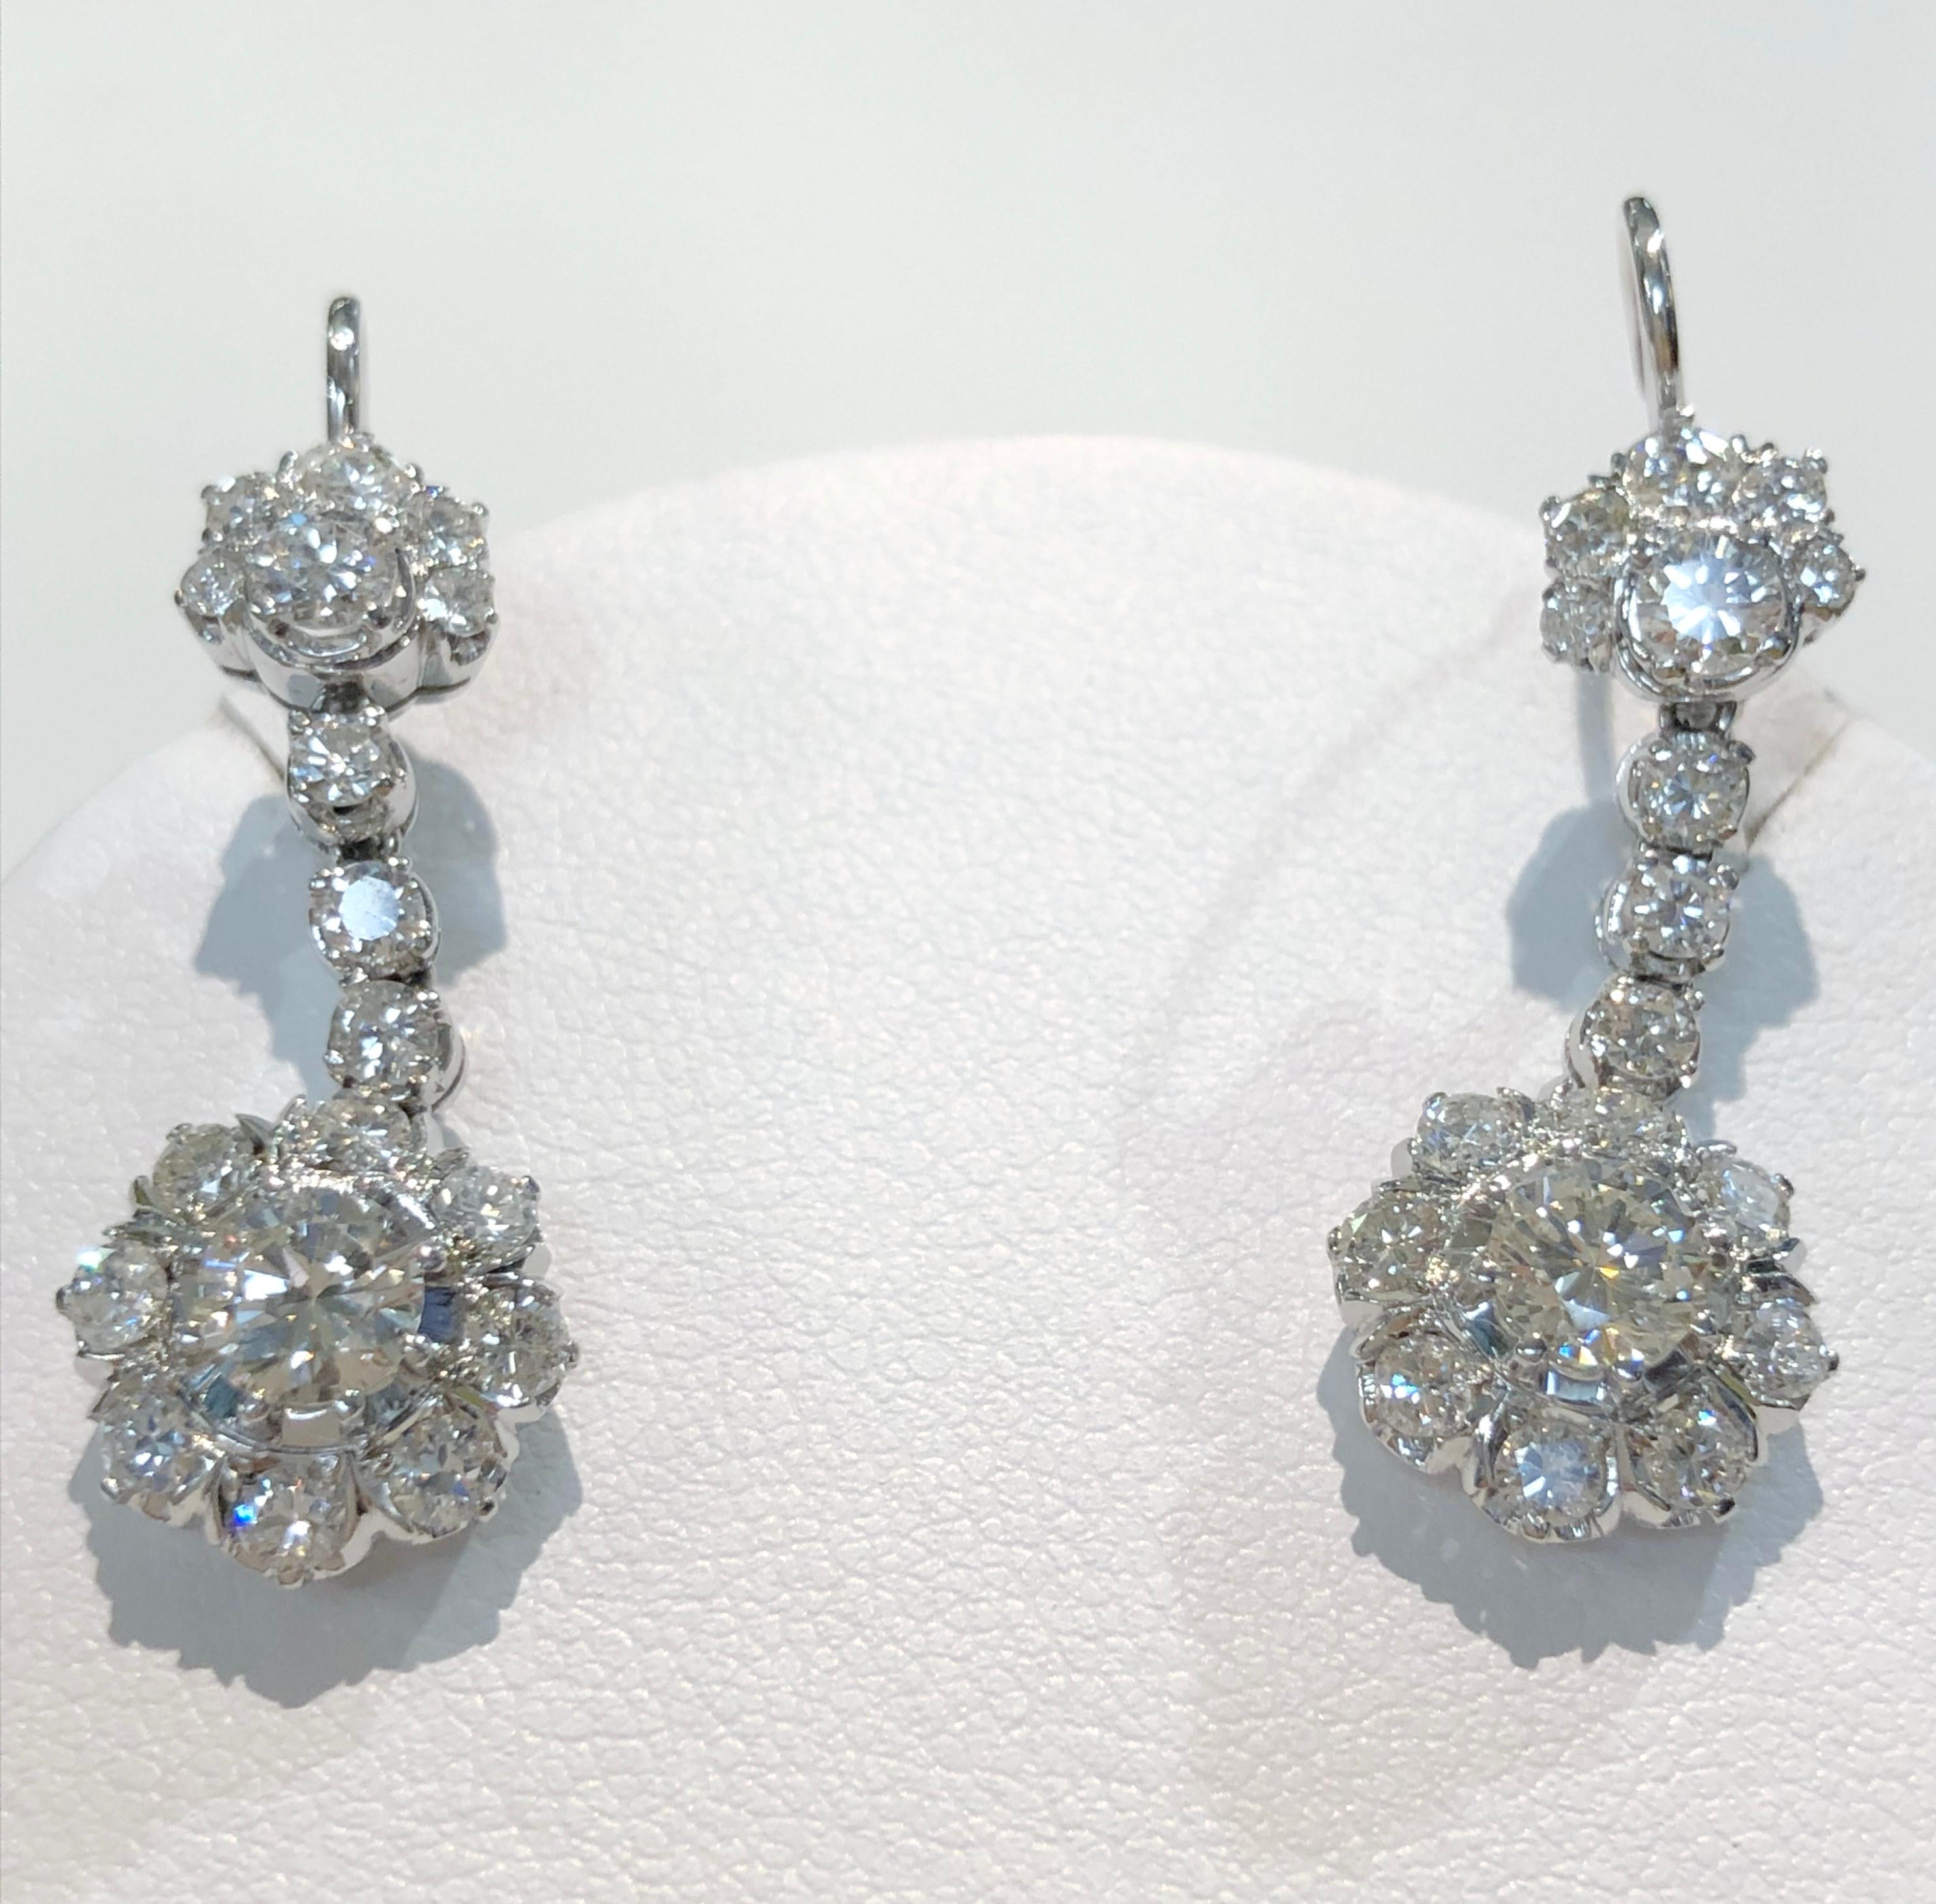 Pair of 18 Karat White Gold and Diamond Earrings In Good Condition For Sale In Palm Springs, CA